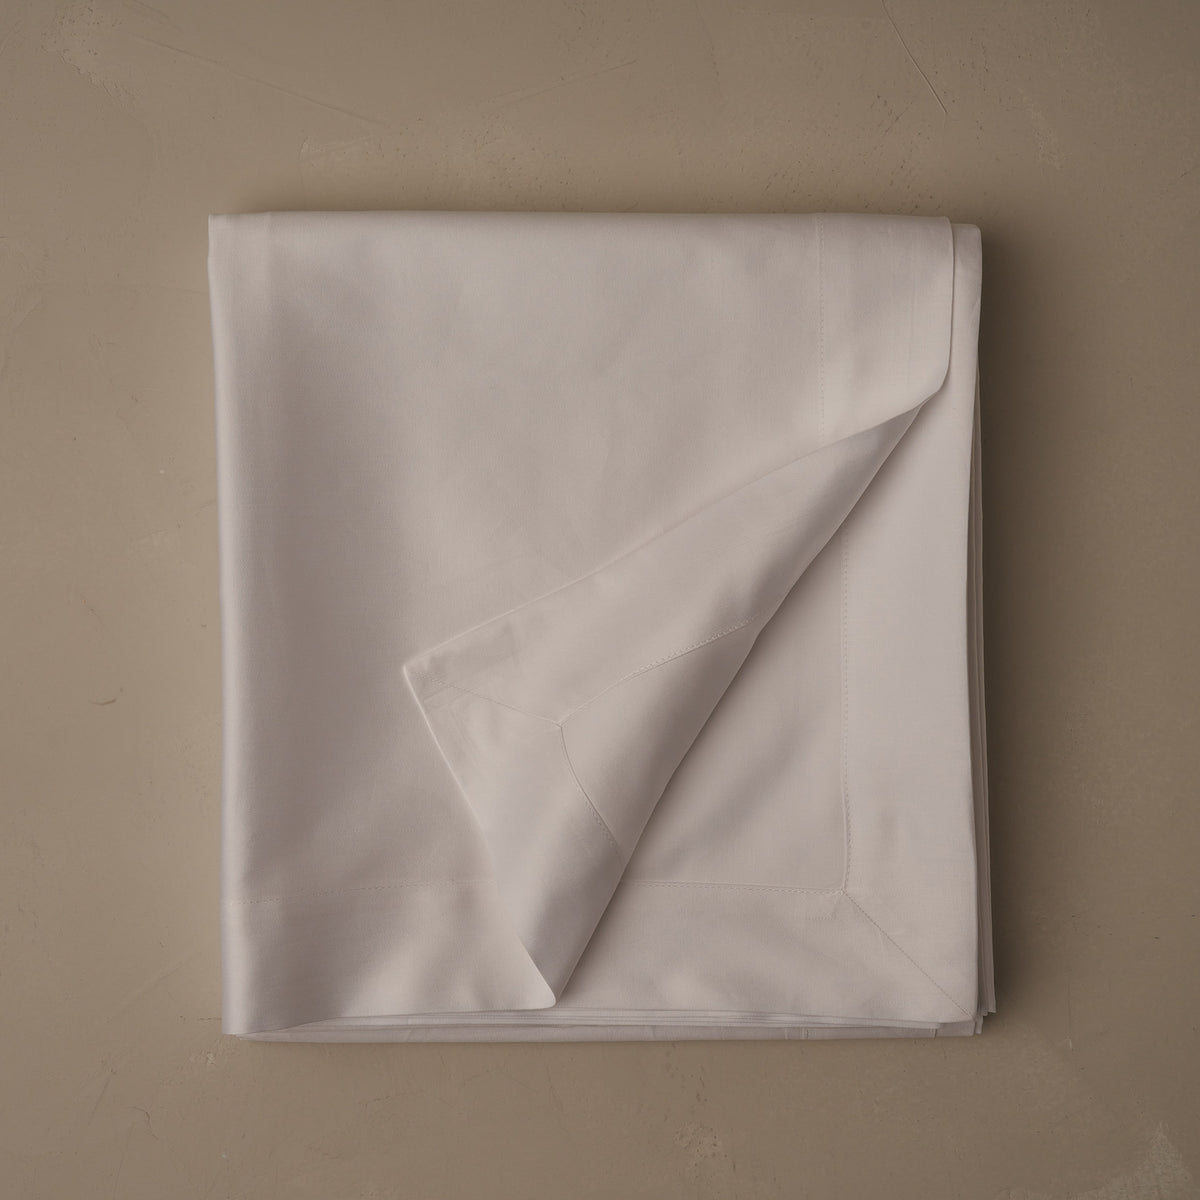 Buttery and transcendent LETTO Sea Island Cotton Sateen flat sheet in color white, made in Italy. data-image-id=